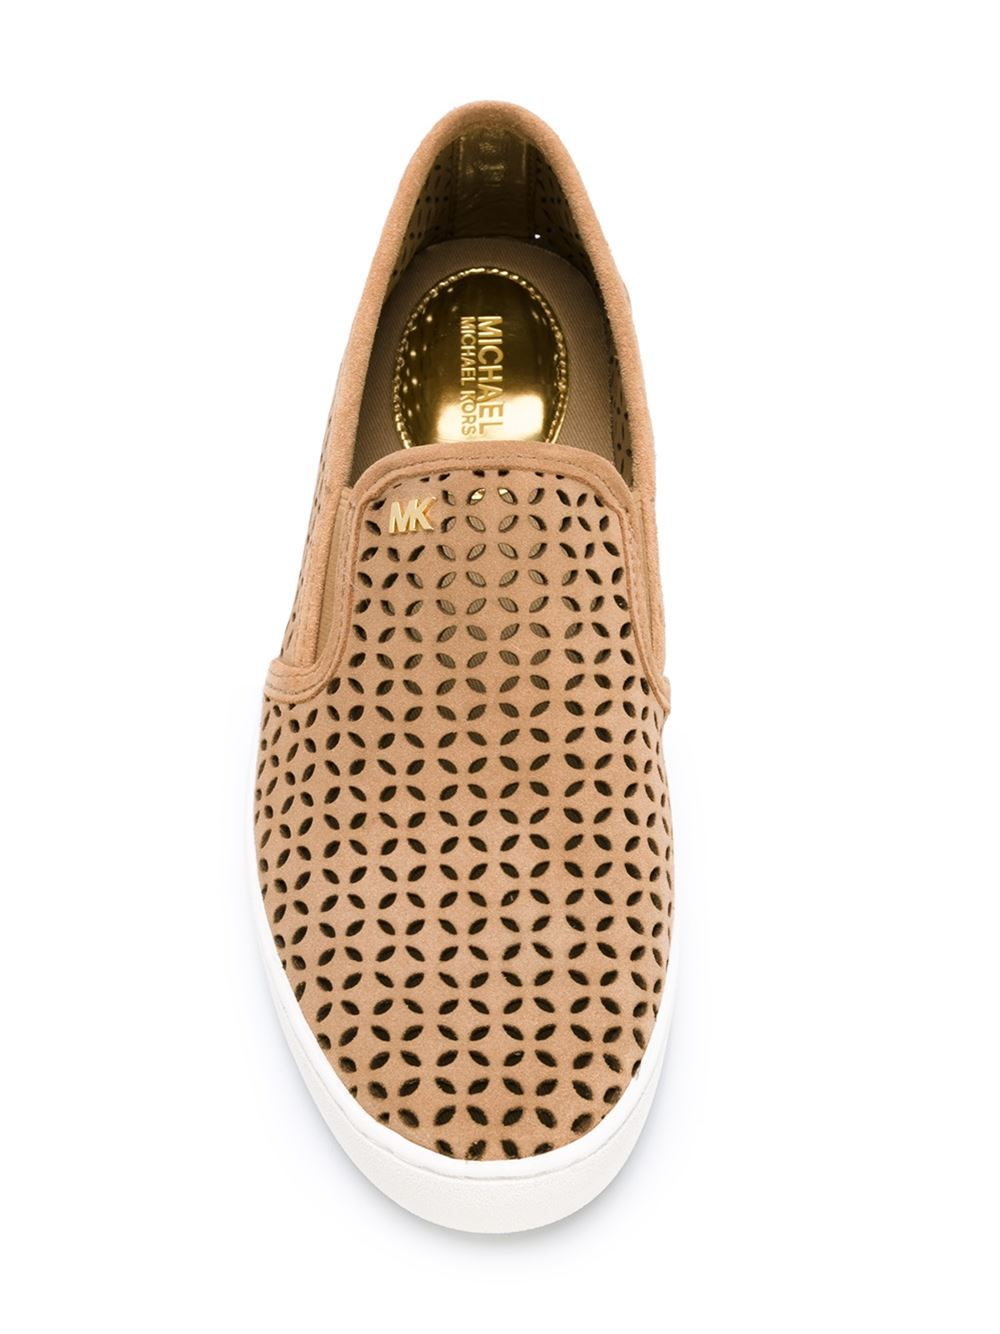 MICHAEL Michael Kors Leather 'olivia' Slip-on Sneakers in Natural | Lyst